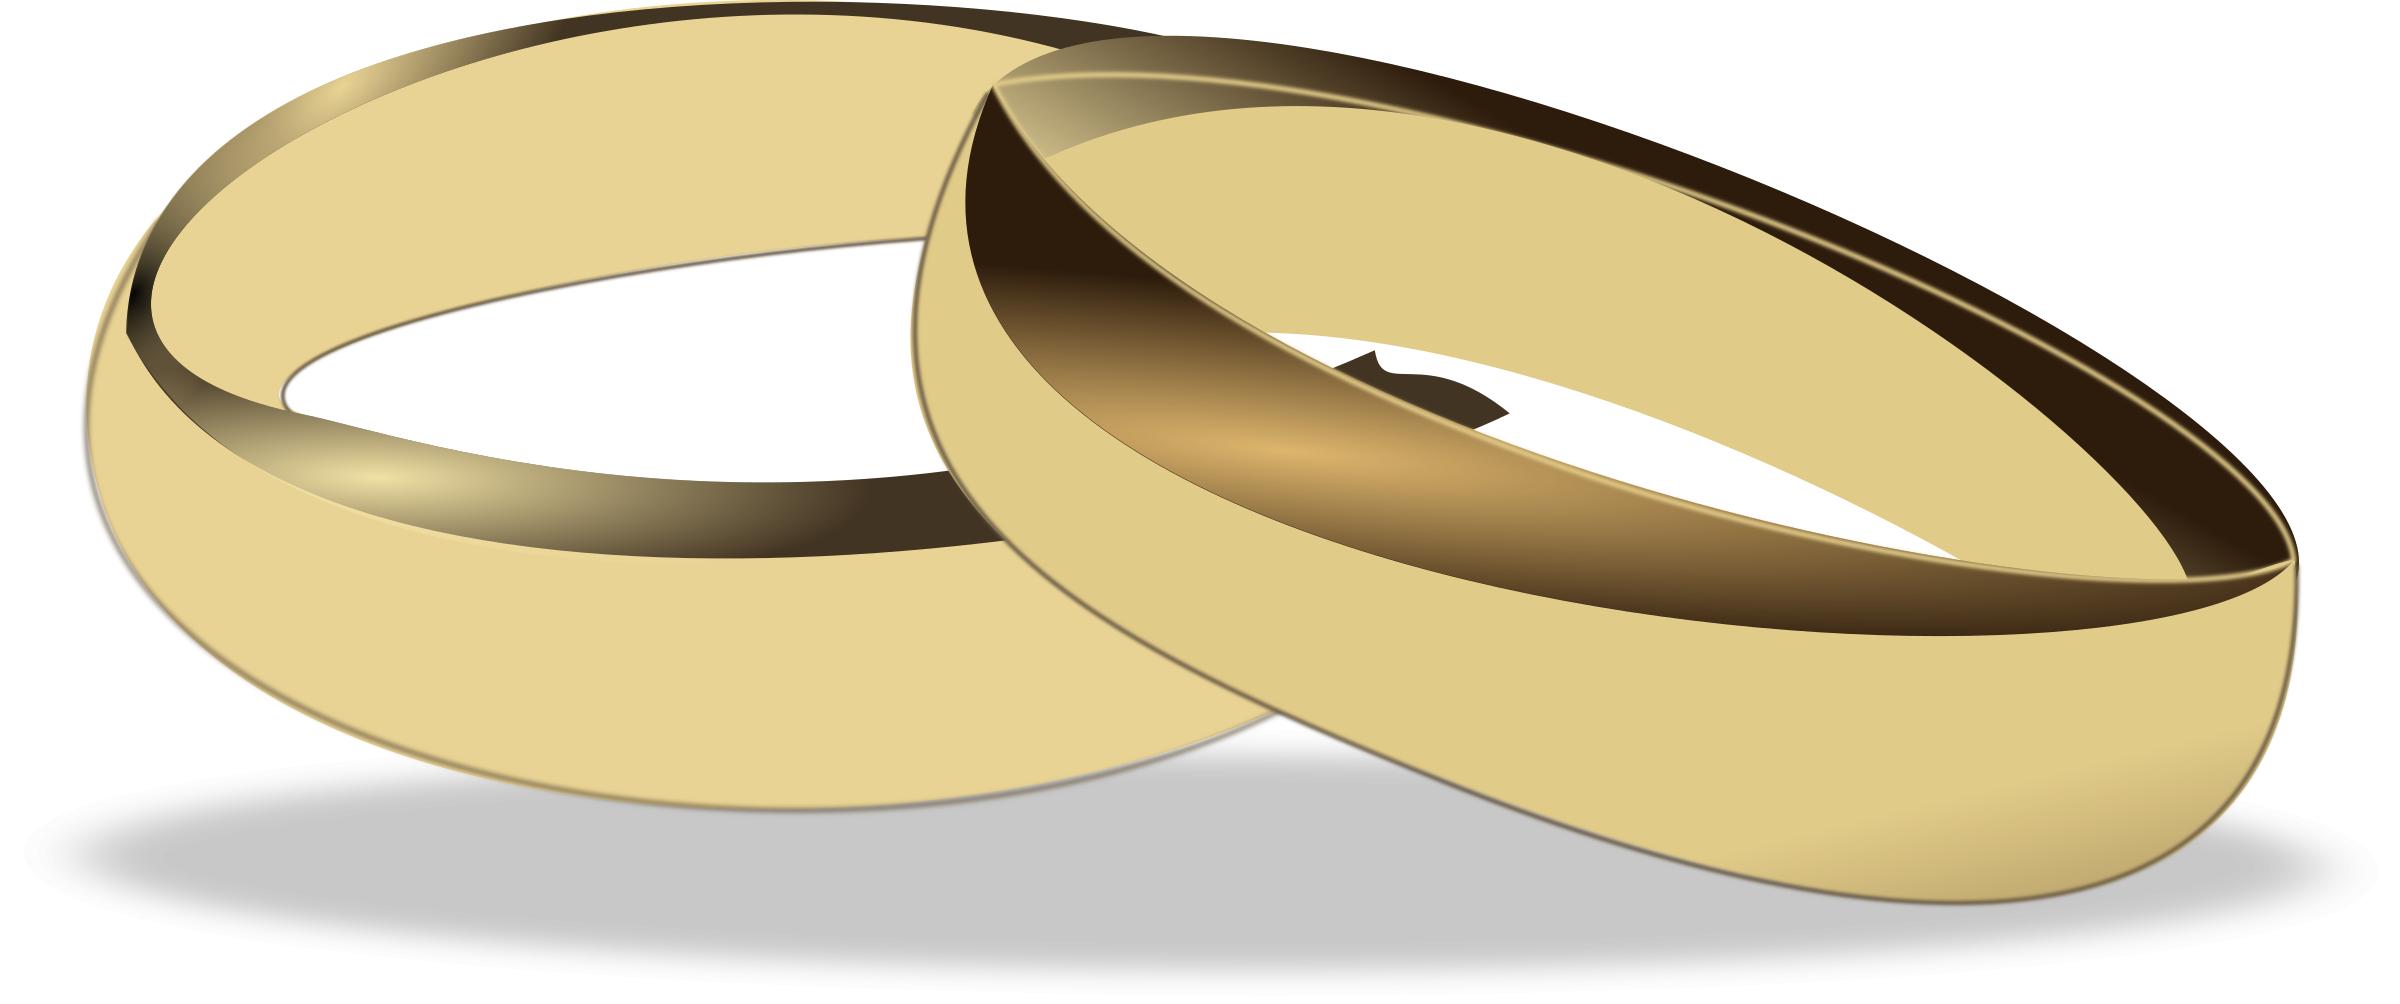 Wedding Rings PNG icons